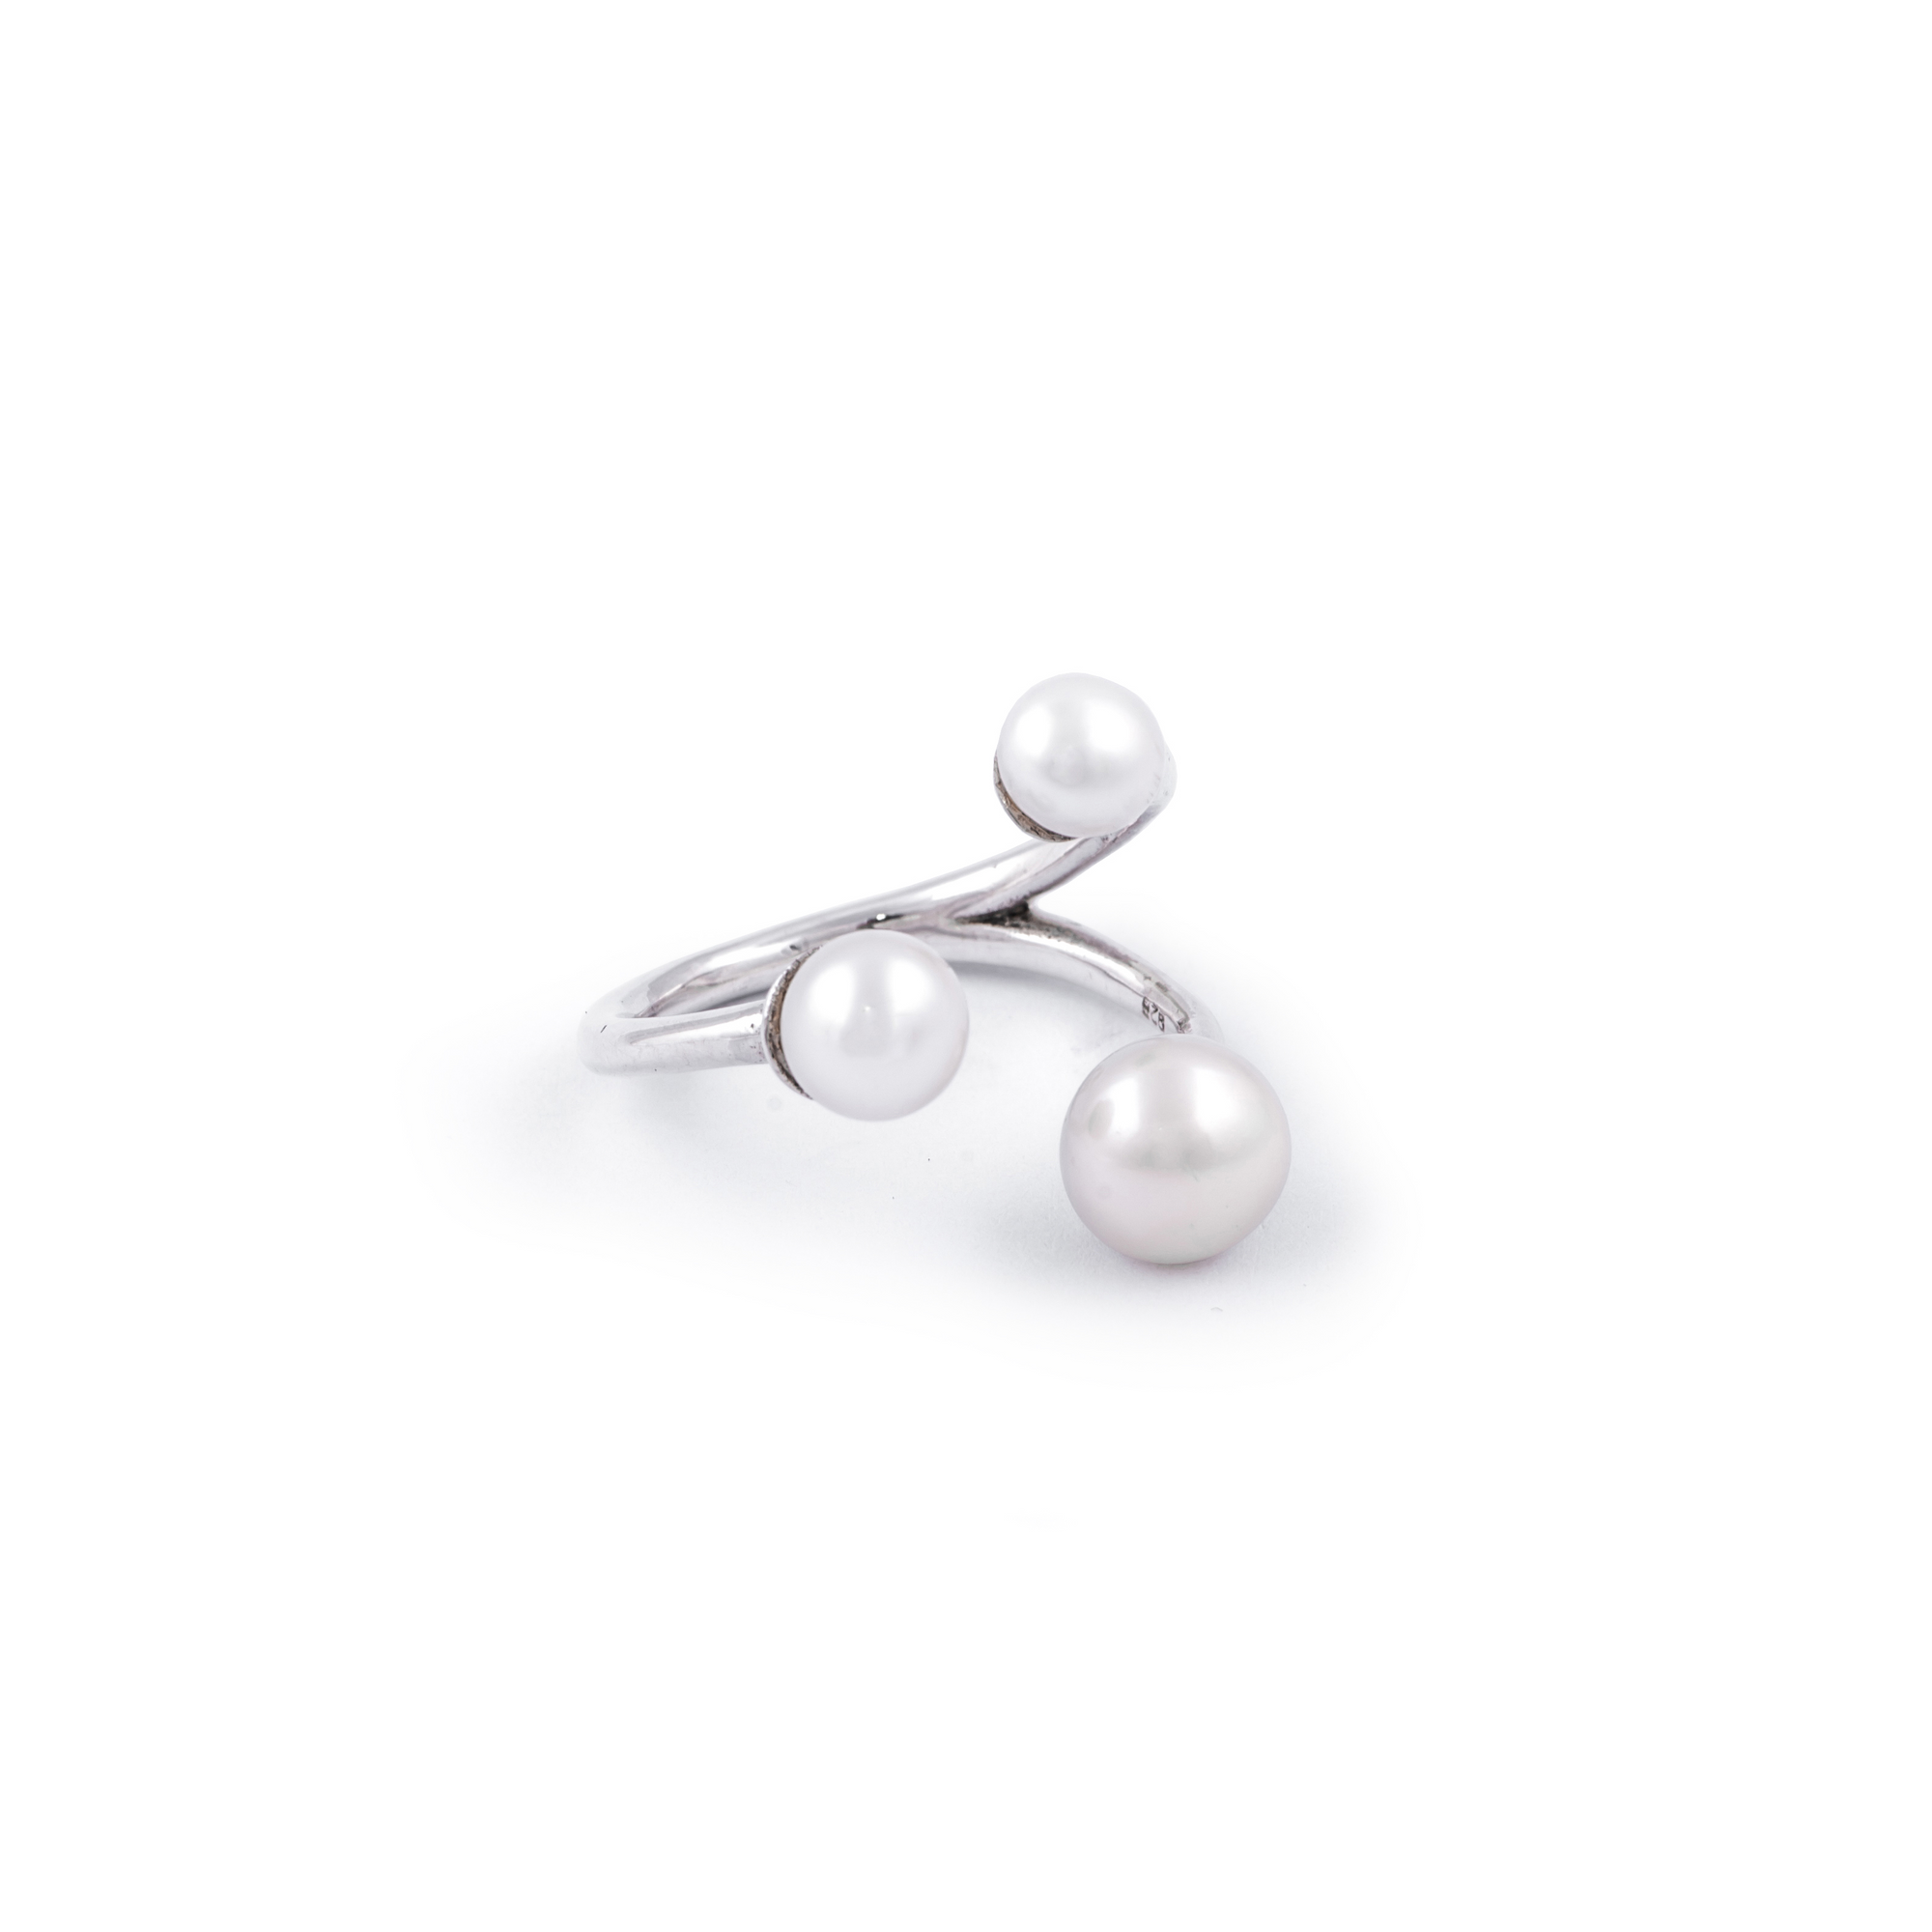 The GRAVITY PEARL Ring